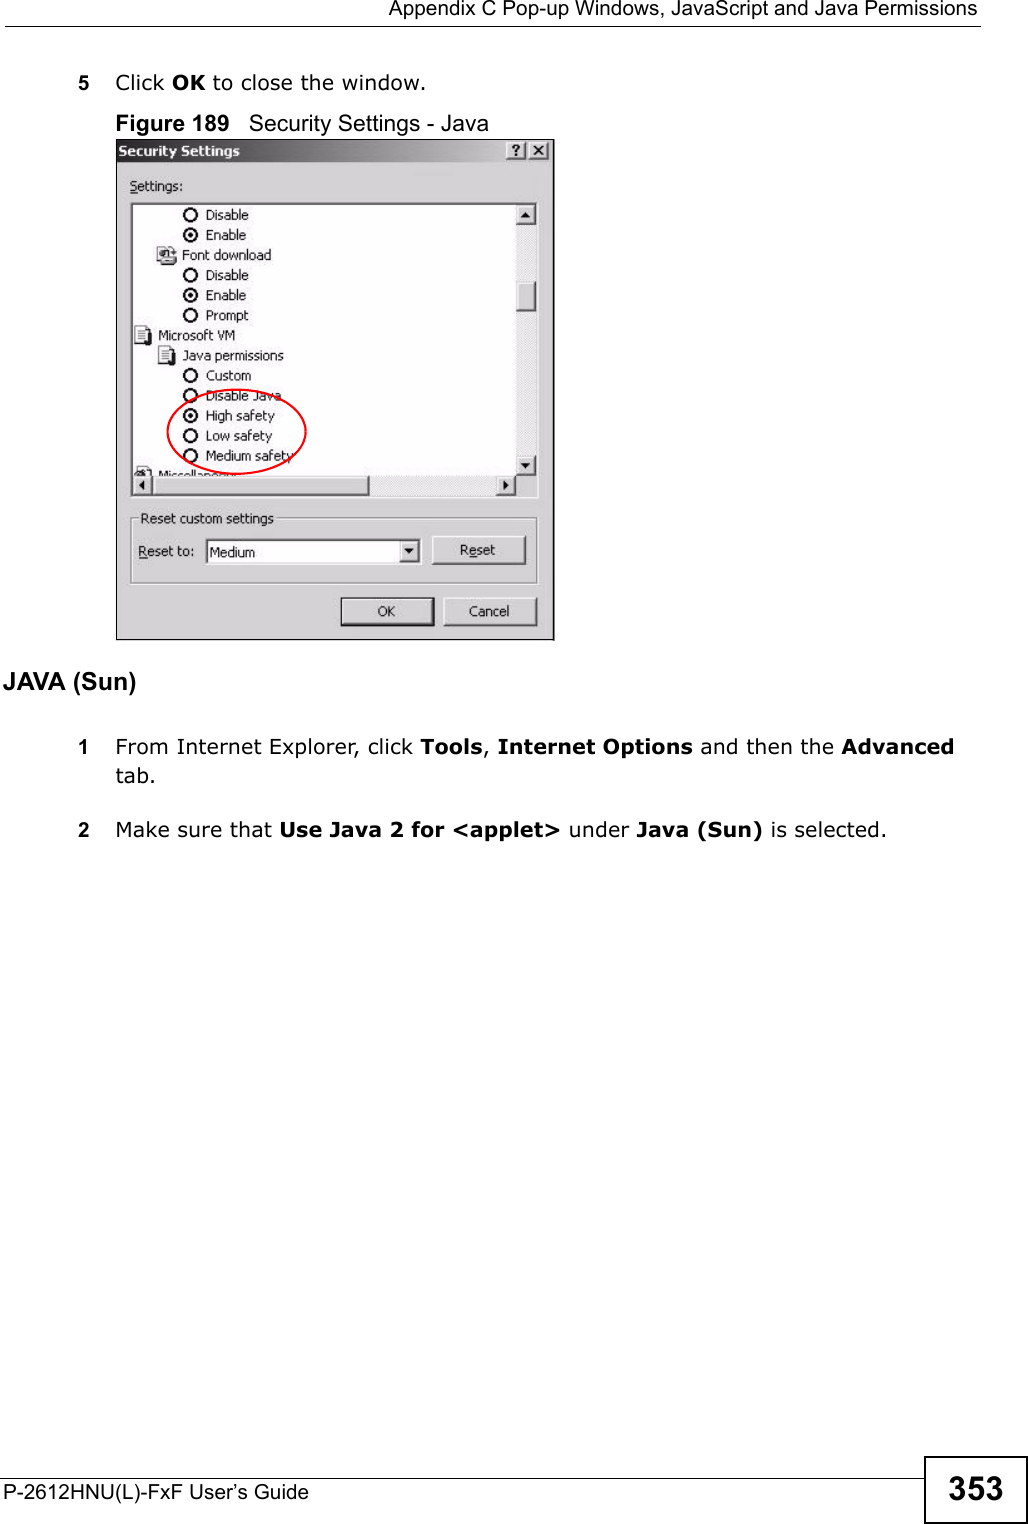  Appendix C Pop-up Windows, JavaScript and Java PermissionsP-2612HNU(L)-FxF User’s Guide 3535Click OK to close the window.Figure 189   Security Settings - Java JAVA (Sun)1From Internet Explorer, click Tools, Internet Options and then the Advancedtab.2Make sure that Use Java 2 for &lt;applet&gt; under Java (Sun) is selected.